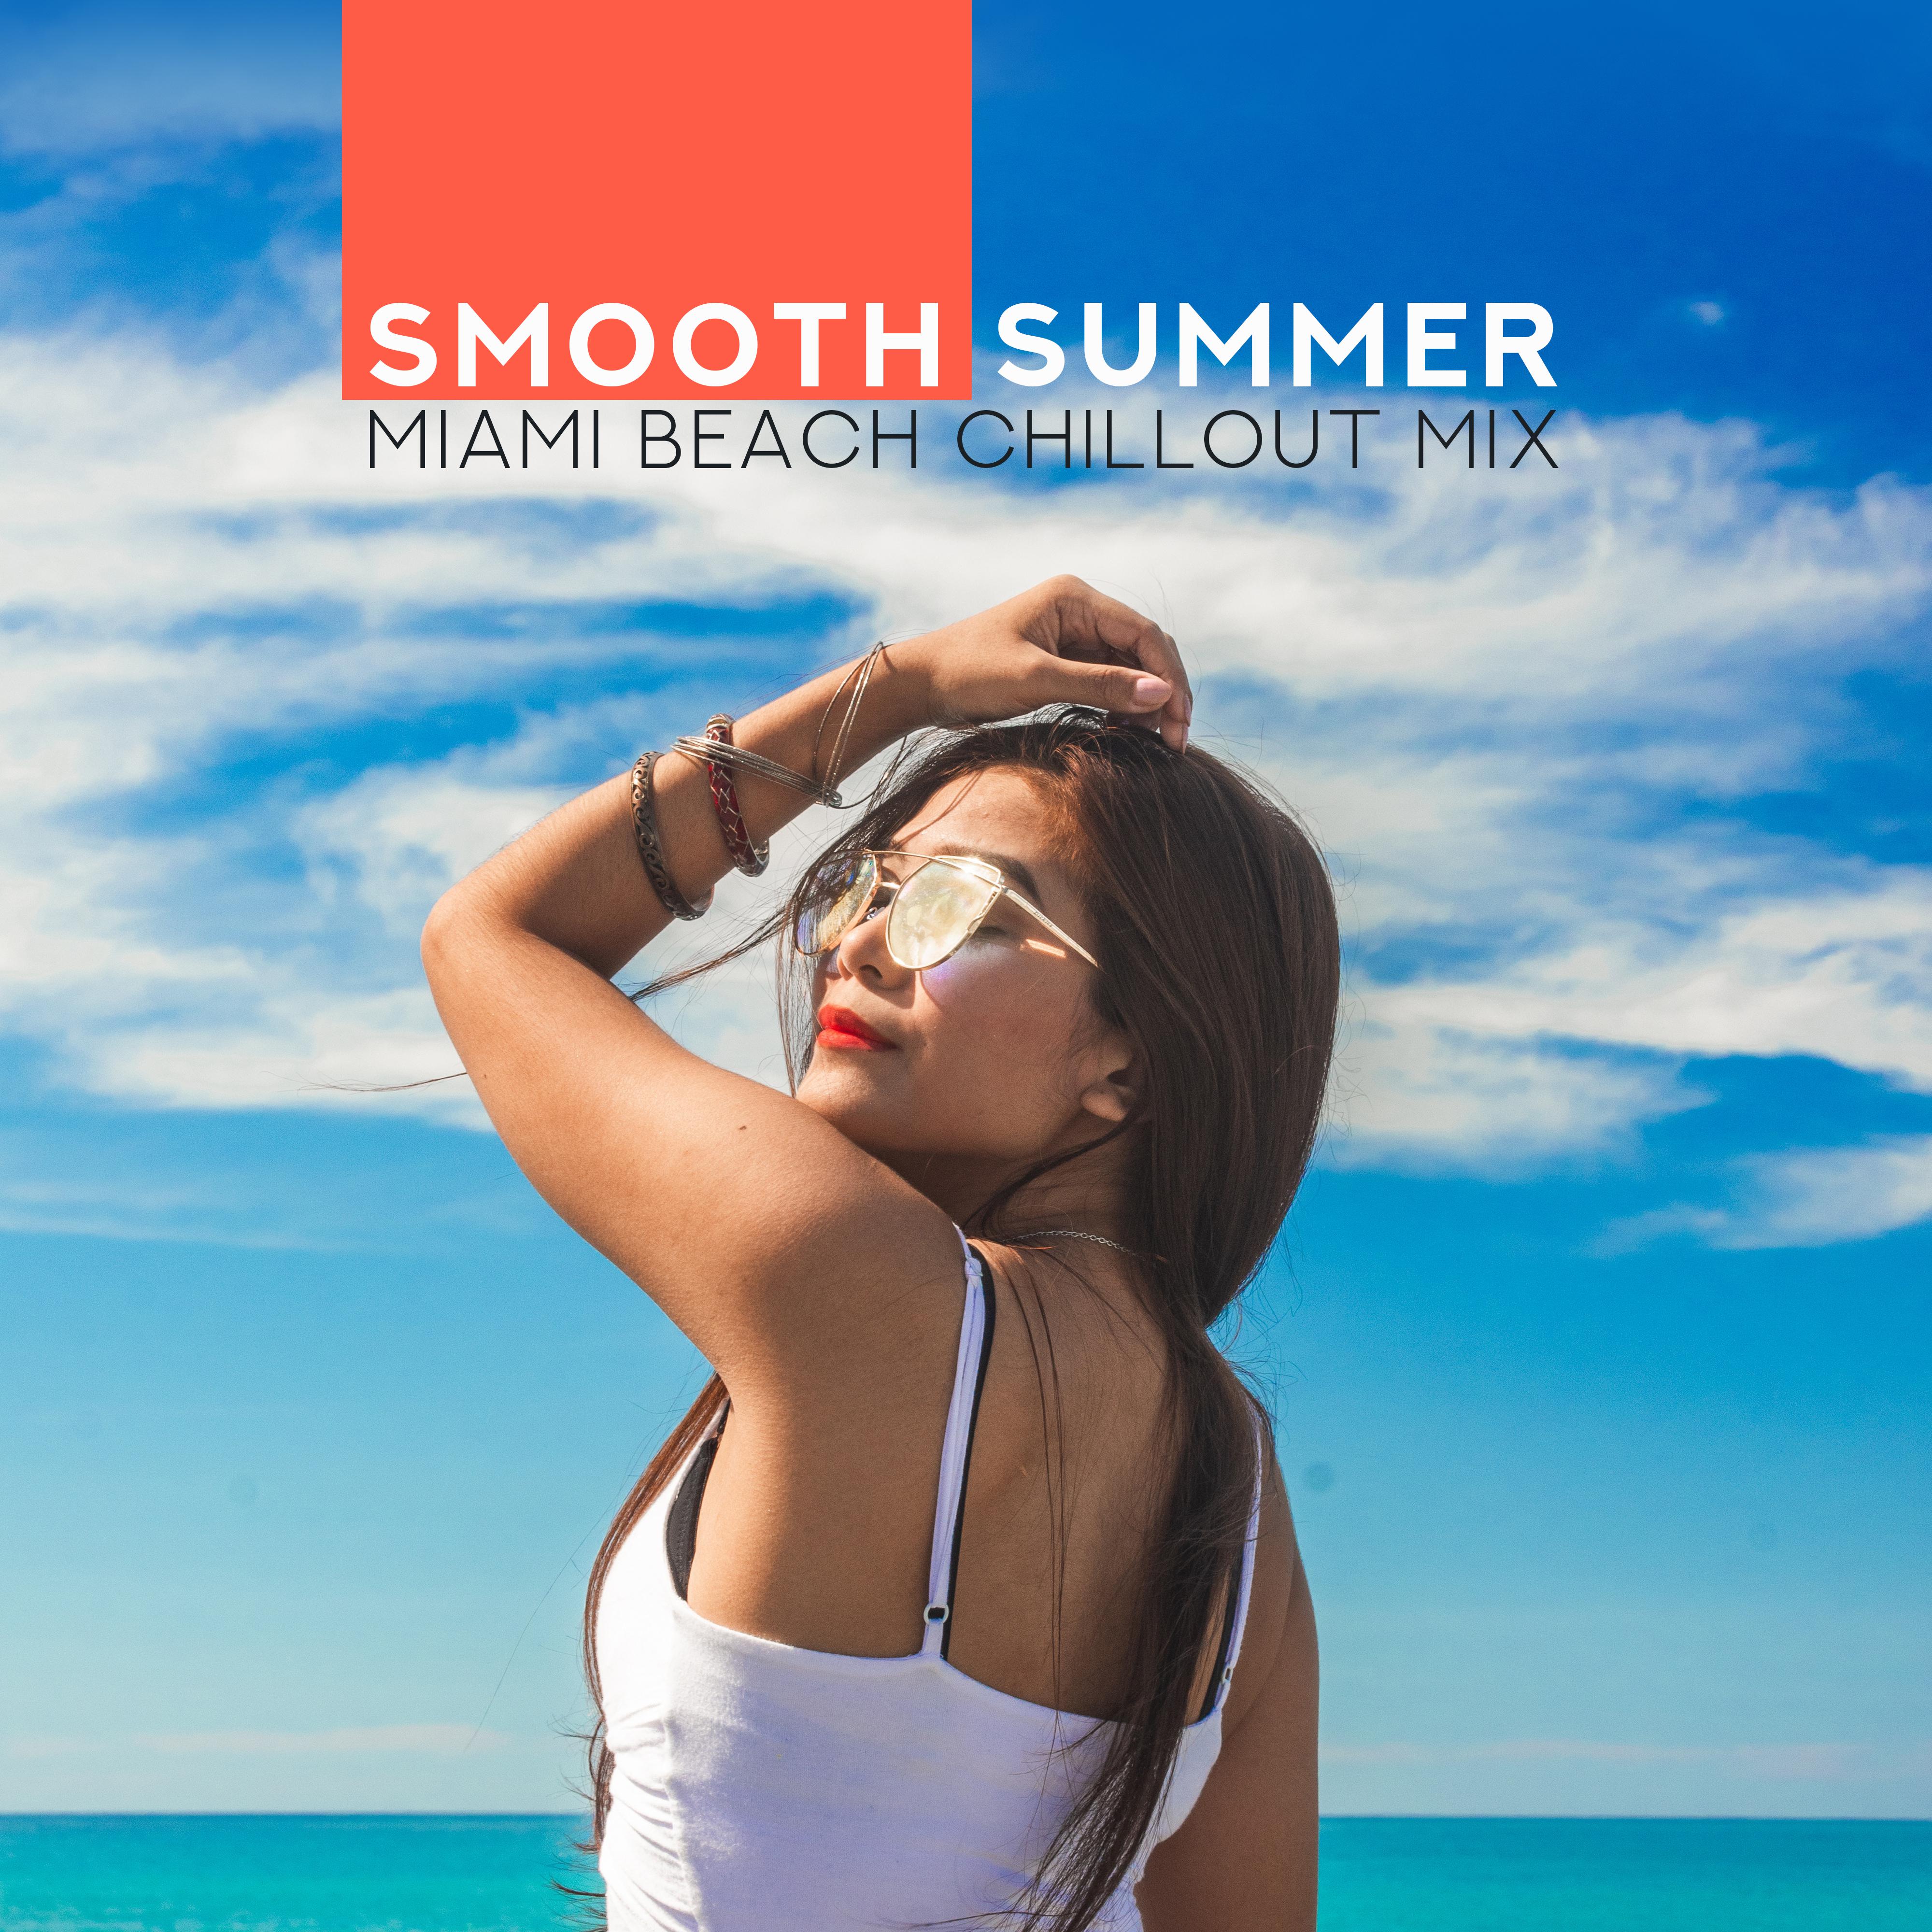 Smooth Summer Miami Beach Chillout Mix – Chill Out Best 2019 Relaxing Music, Holiday Soft Beats, Sunbathing Slow Songs